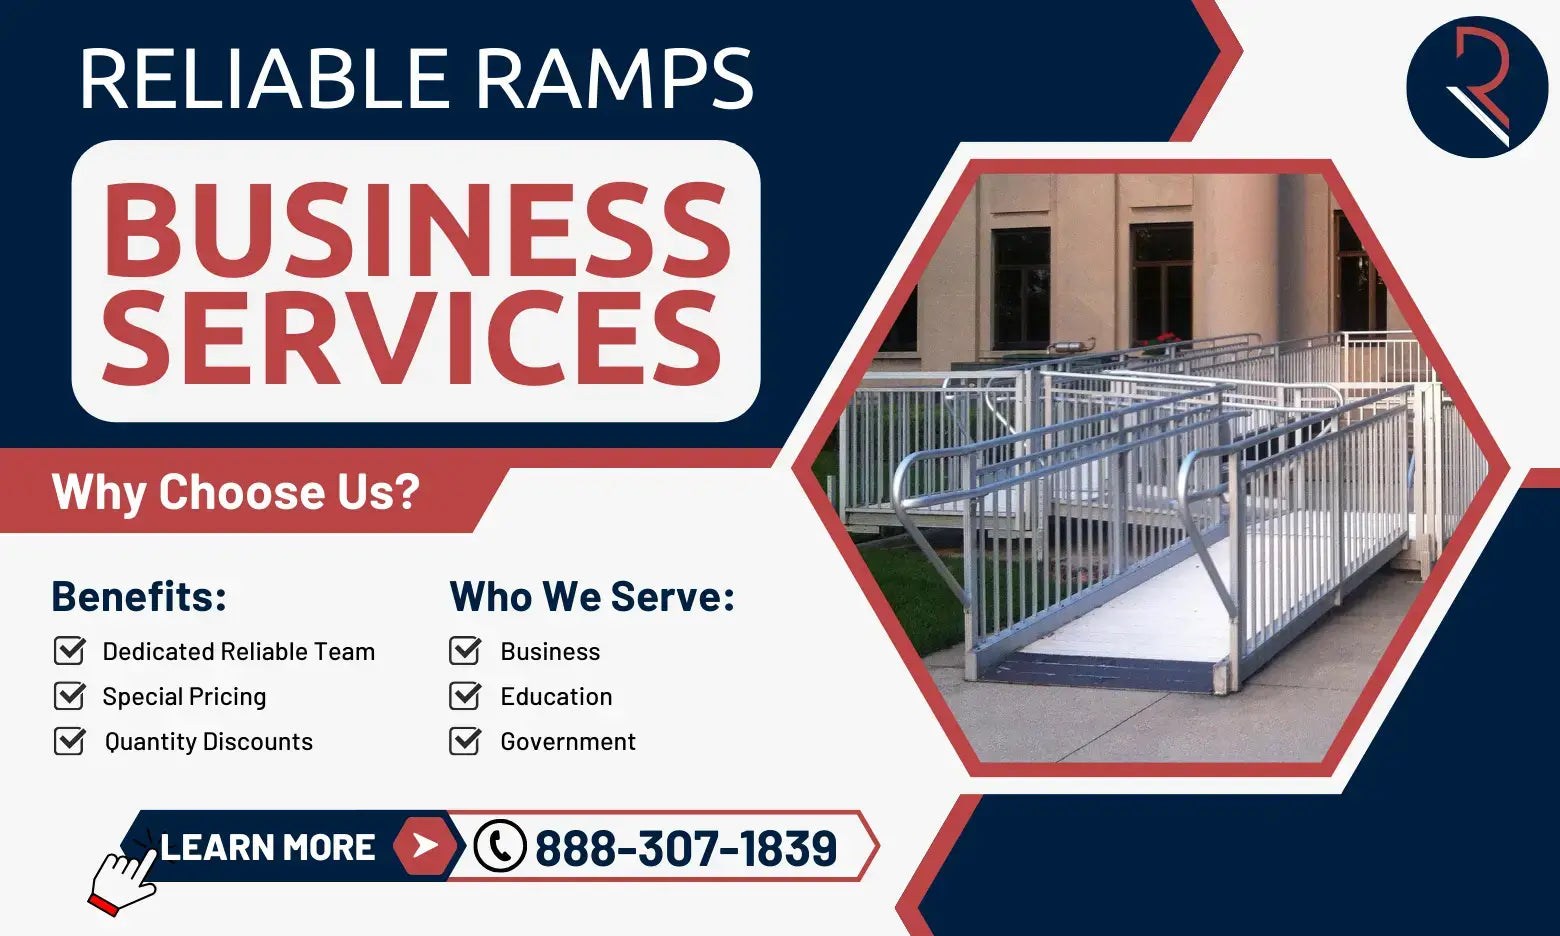 relibable ramps business services for the trade banner for website